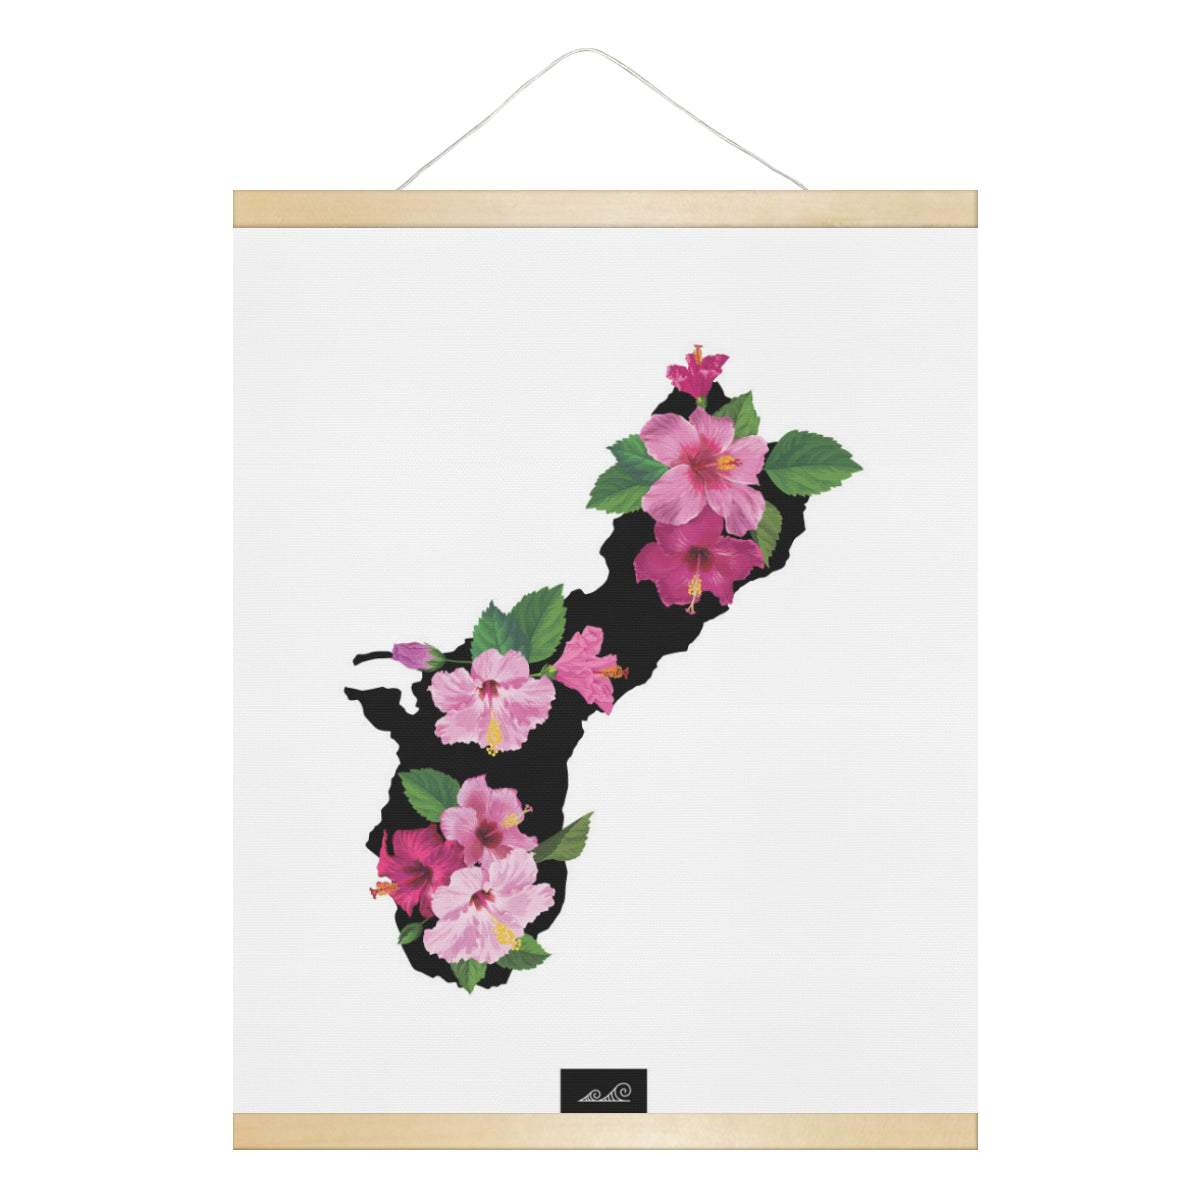 Guam Island Hibiscus Fuchsia Black Hanging Canvas Poster with Wood Frame